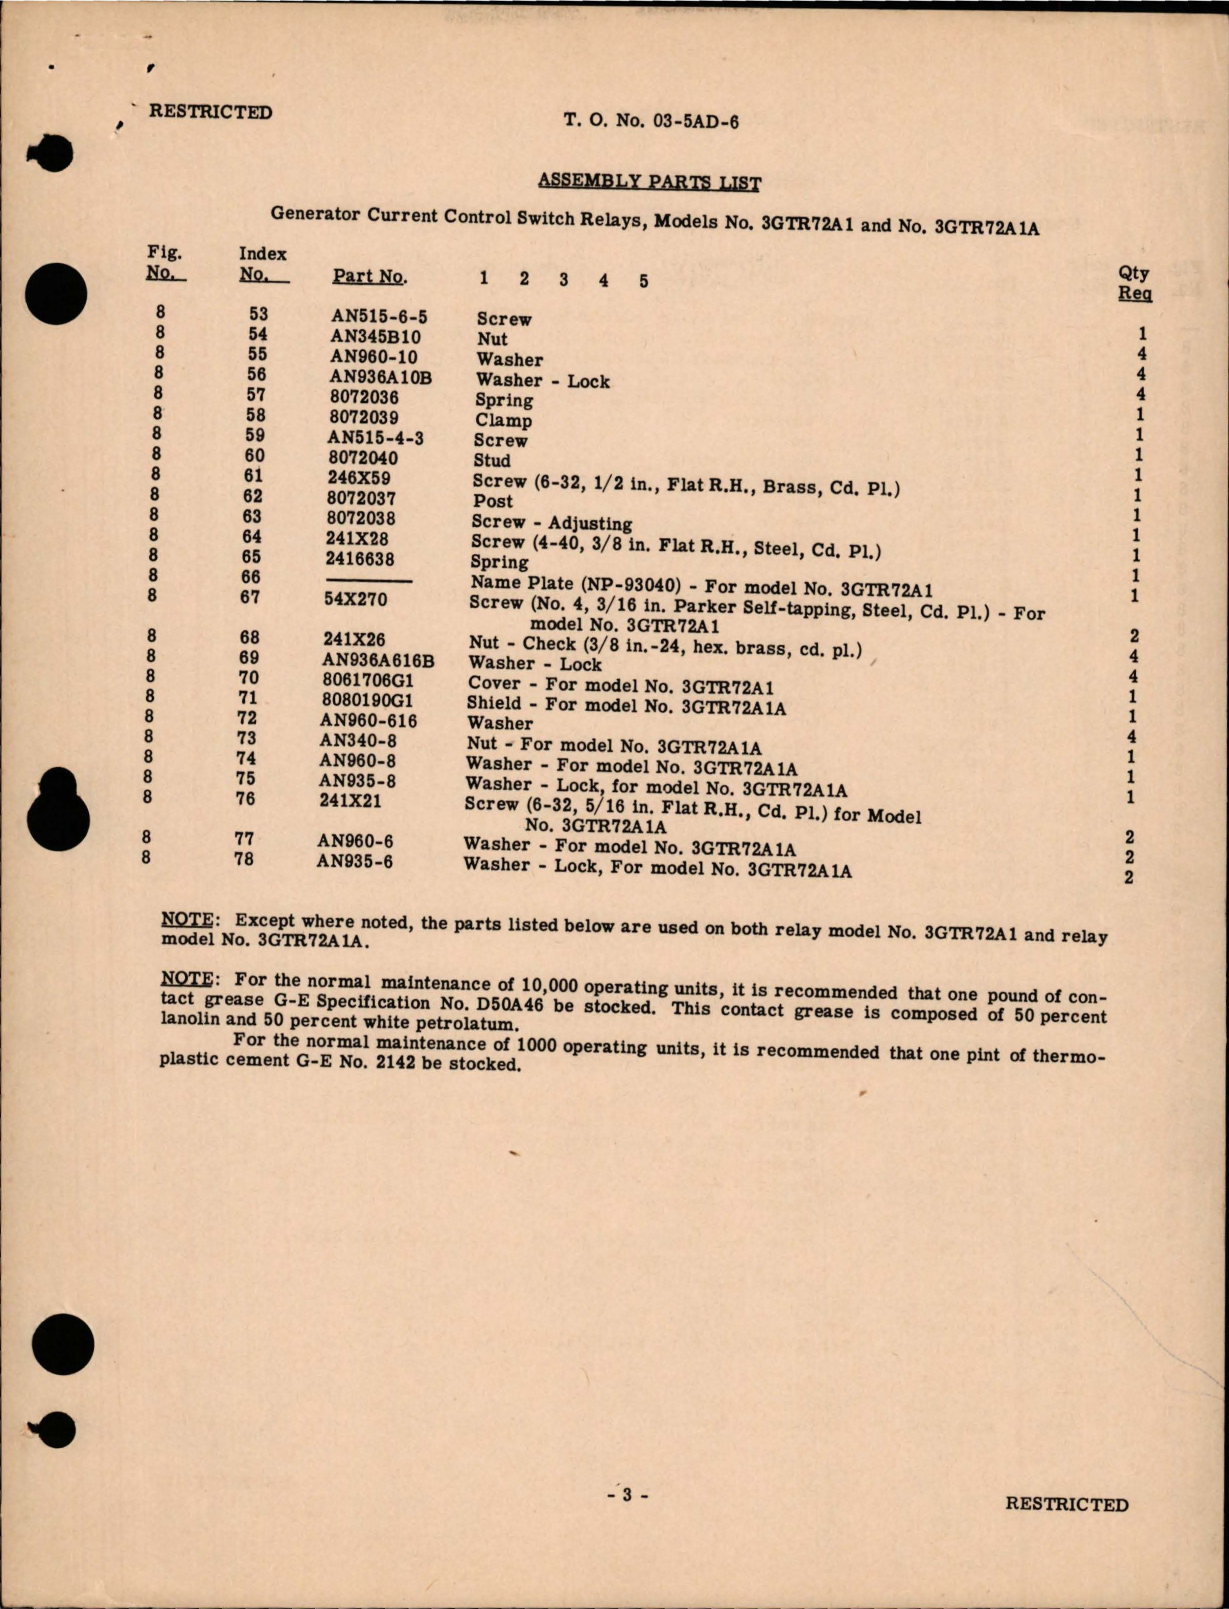 Sample page 5 from AirCorps Library document: Parts Catalog for Current Control Generator Switch Relays - Models 3GTR72A1 and 3GTR72A1A 